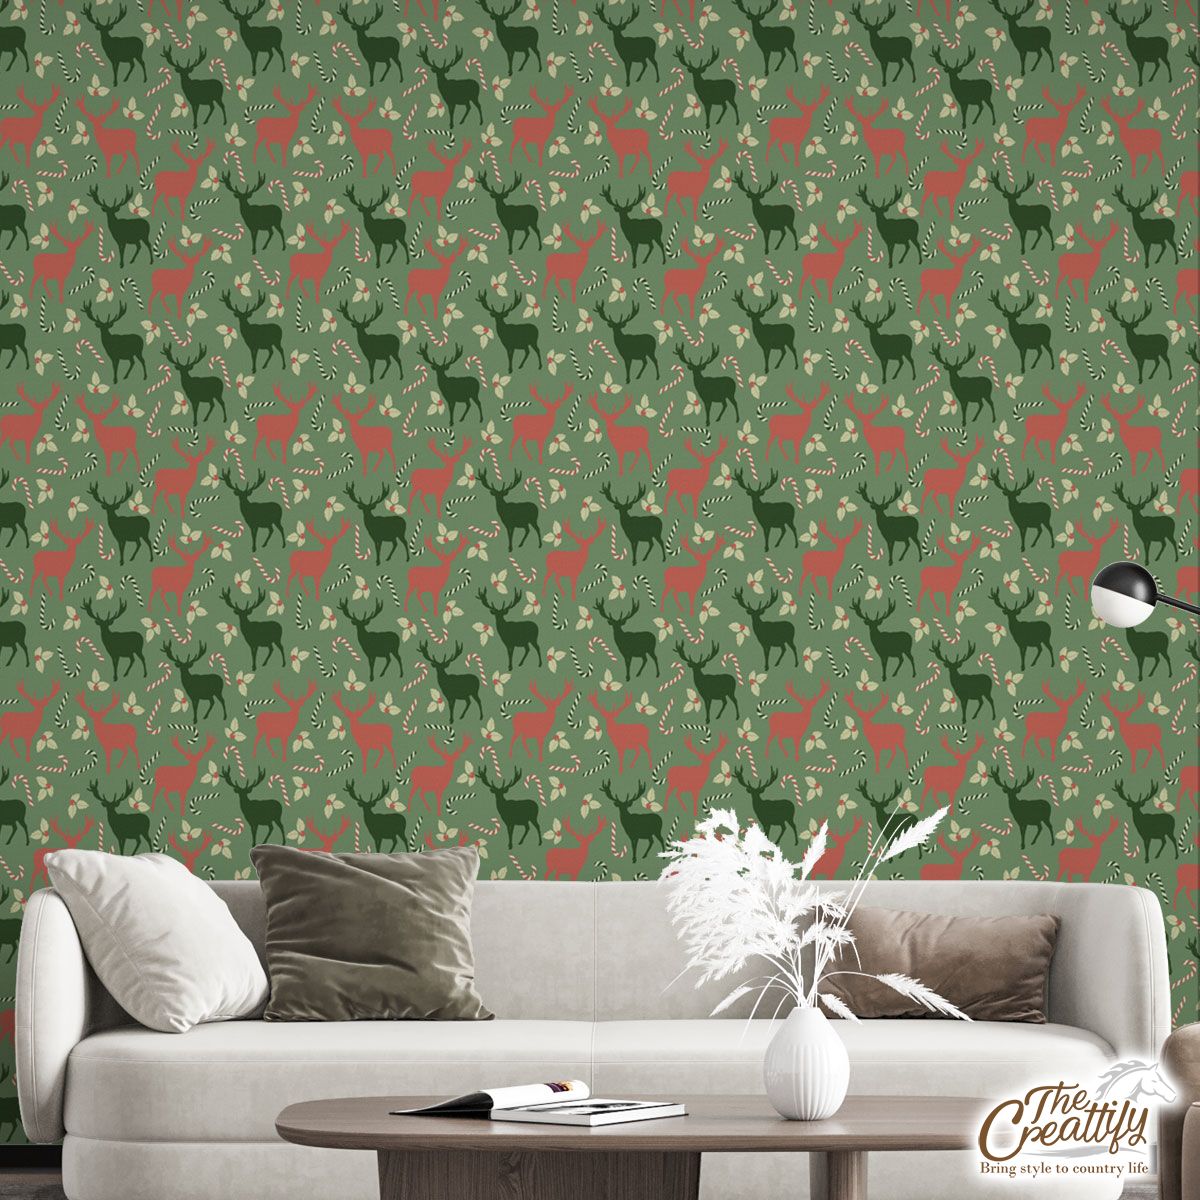 Reindeer, Christmas Flowers And Candy Canes Wall Mural